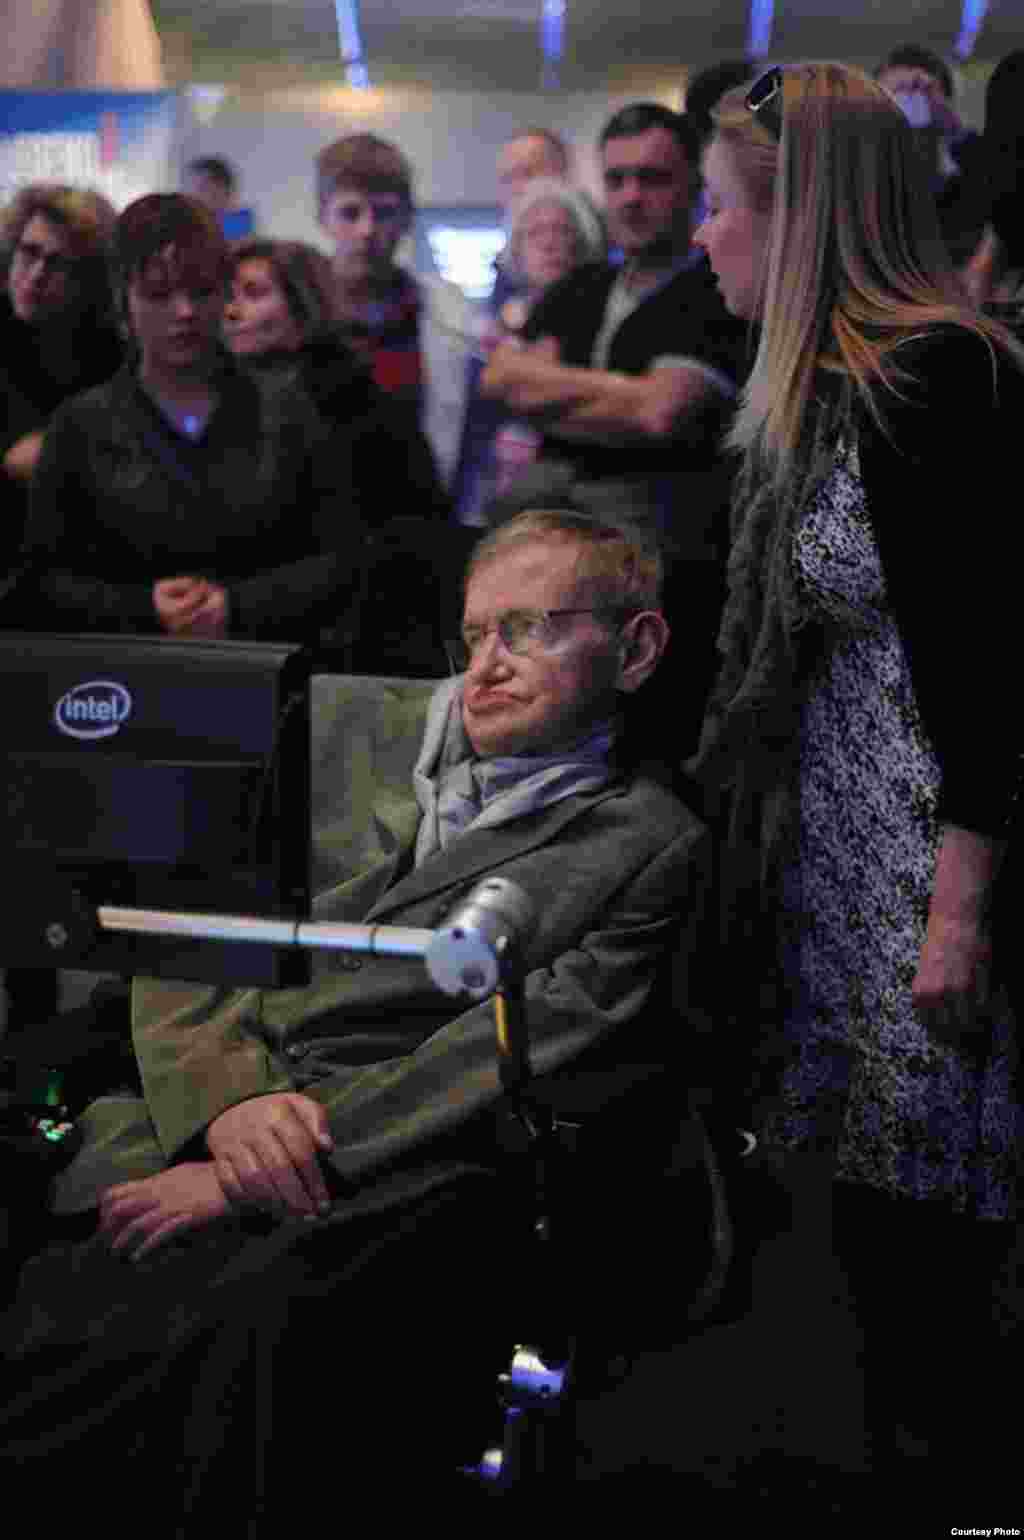 Stephen Hawking visits the London Science Museum’s exhibit on his life and work. (Sarah Lee)